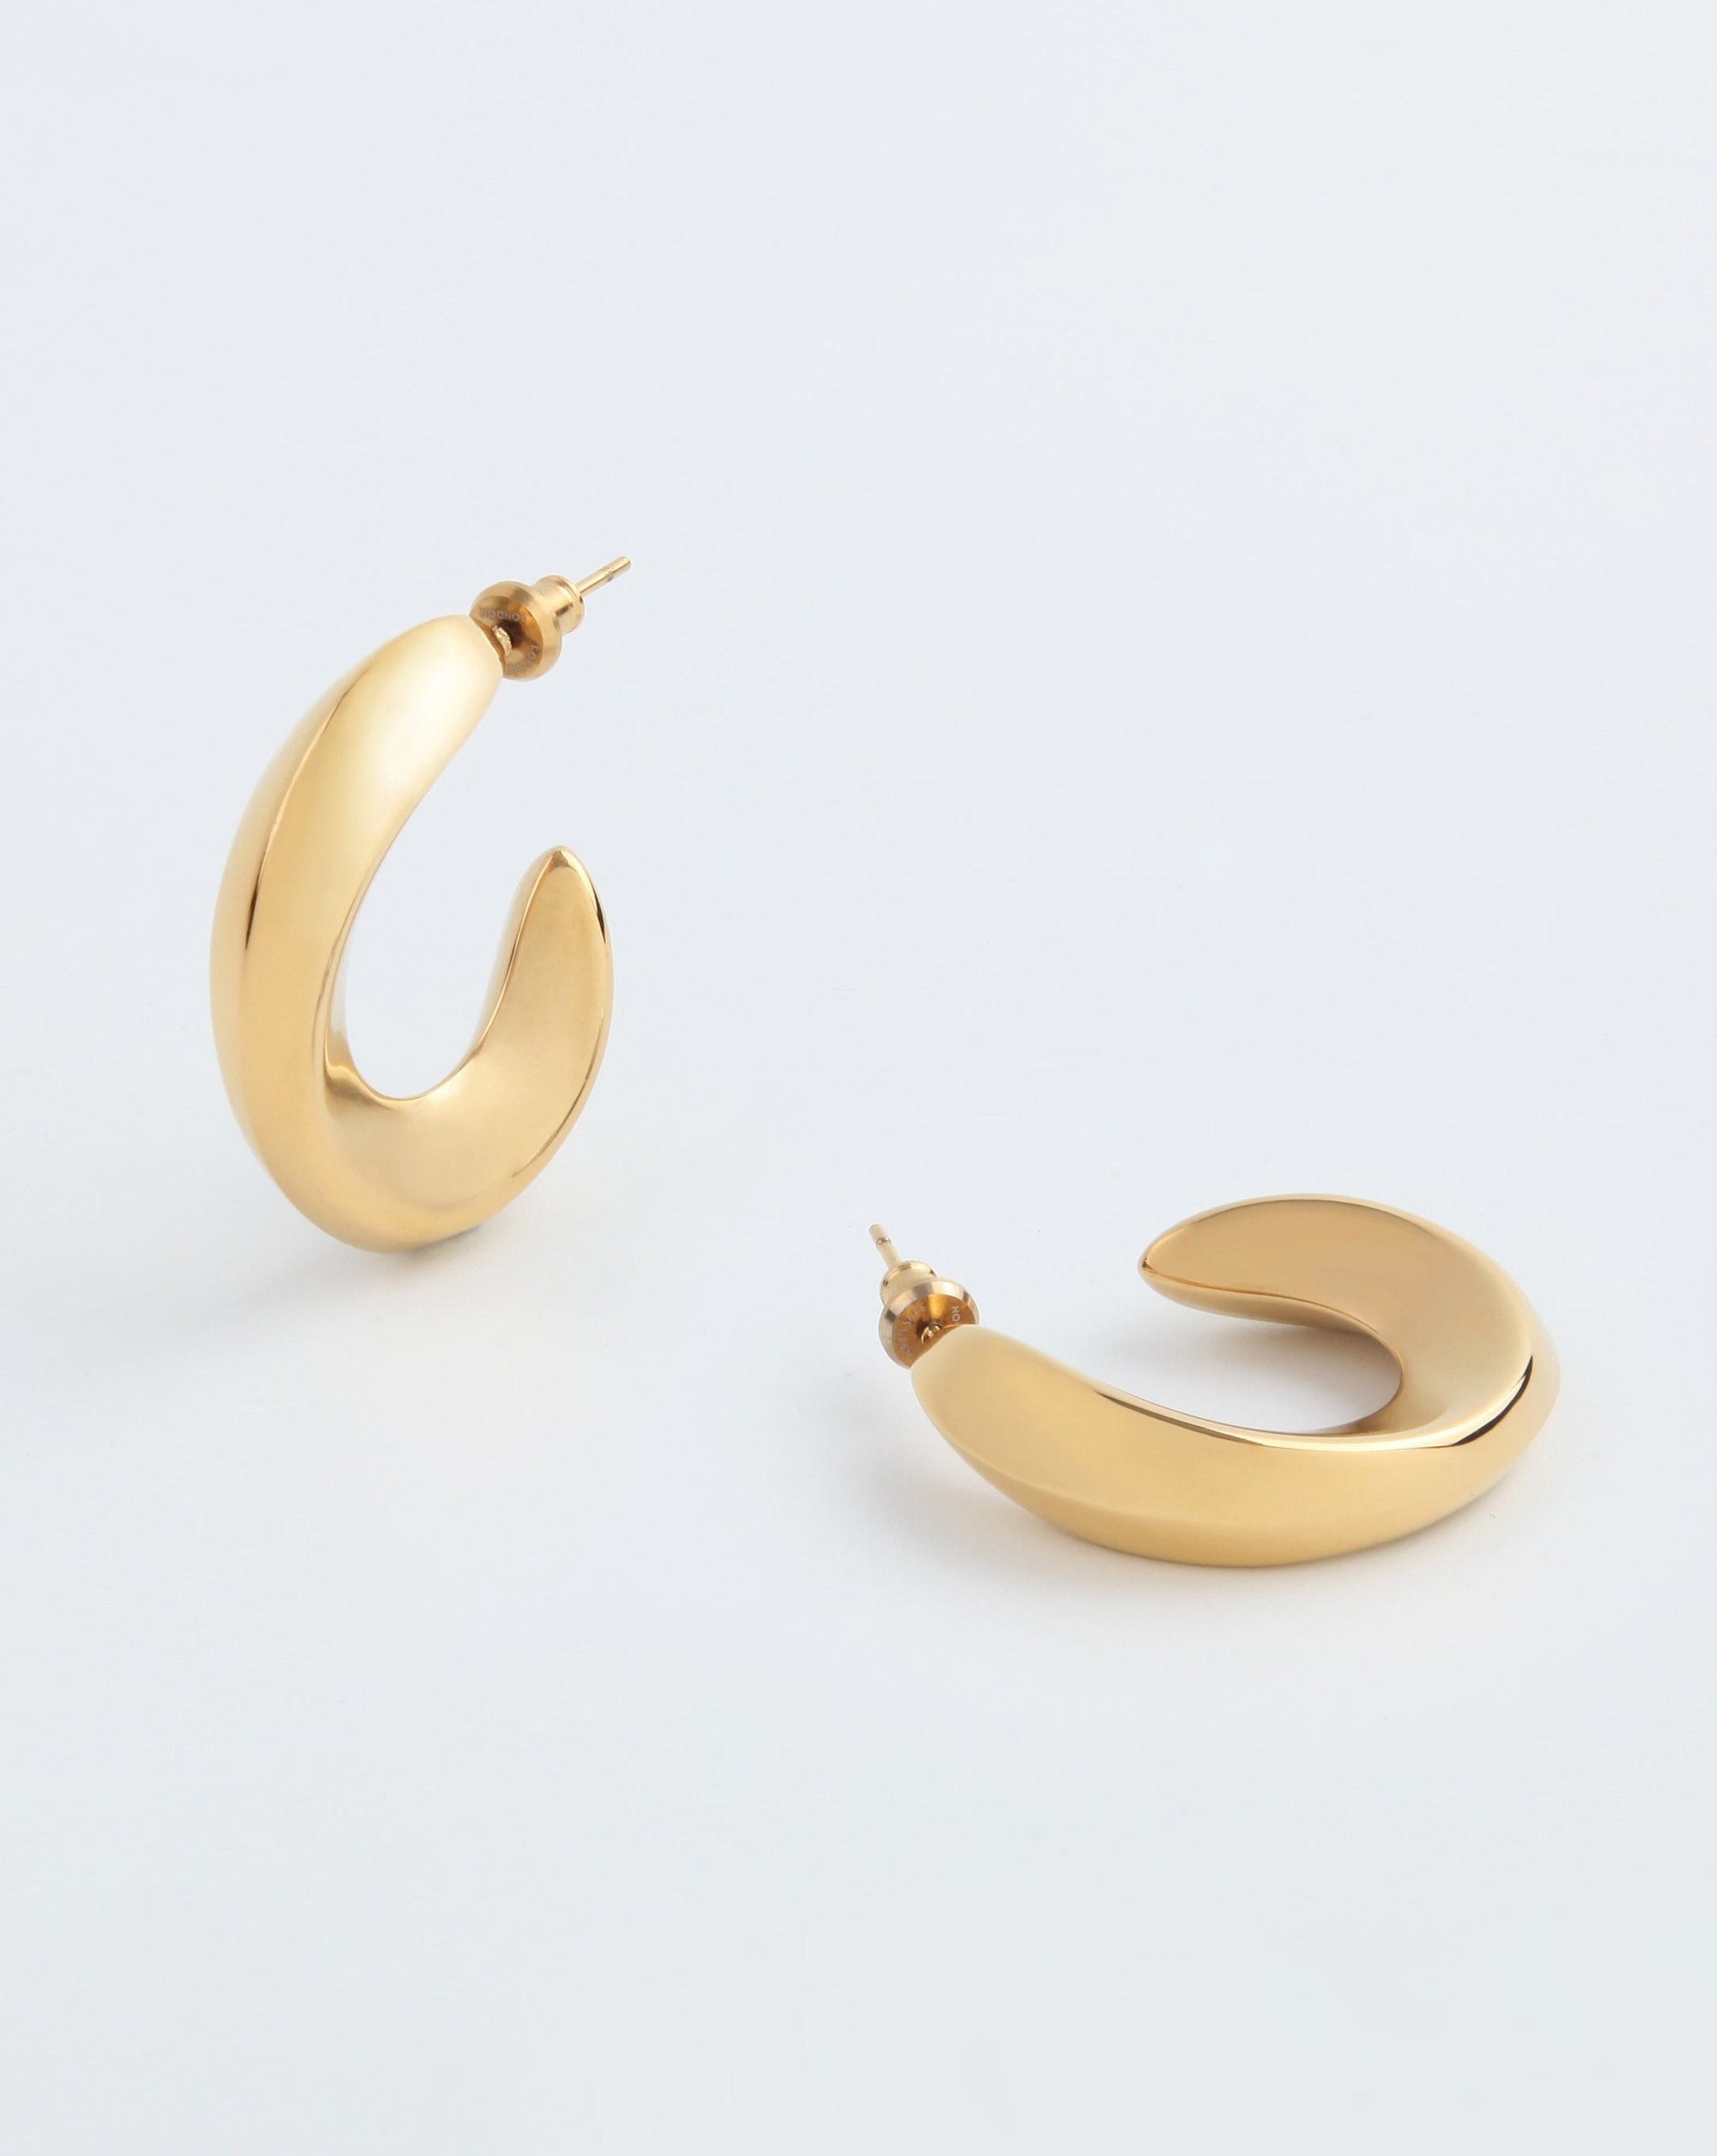 A pair of crescent-shaped, chunky half hoop design gold Wave Earrings Gold by For Art's Sake® is shown against a plain white background. One 18kt gold-plated earring is standing upright, and the other is laid flat, showcasing their smooth and hand-polished finish.